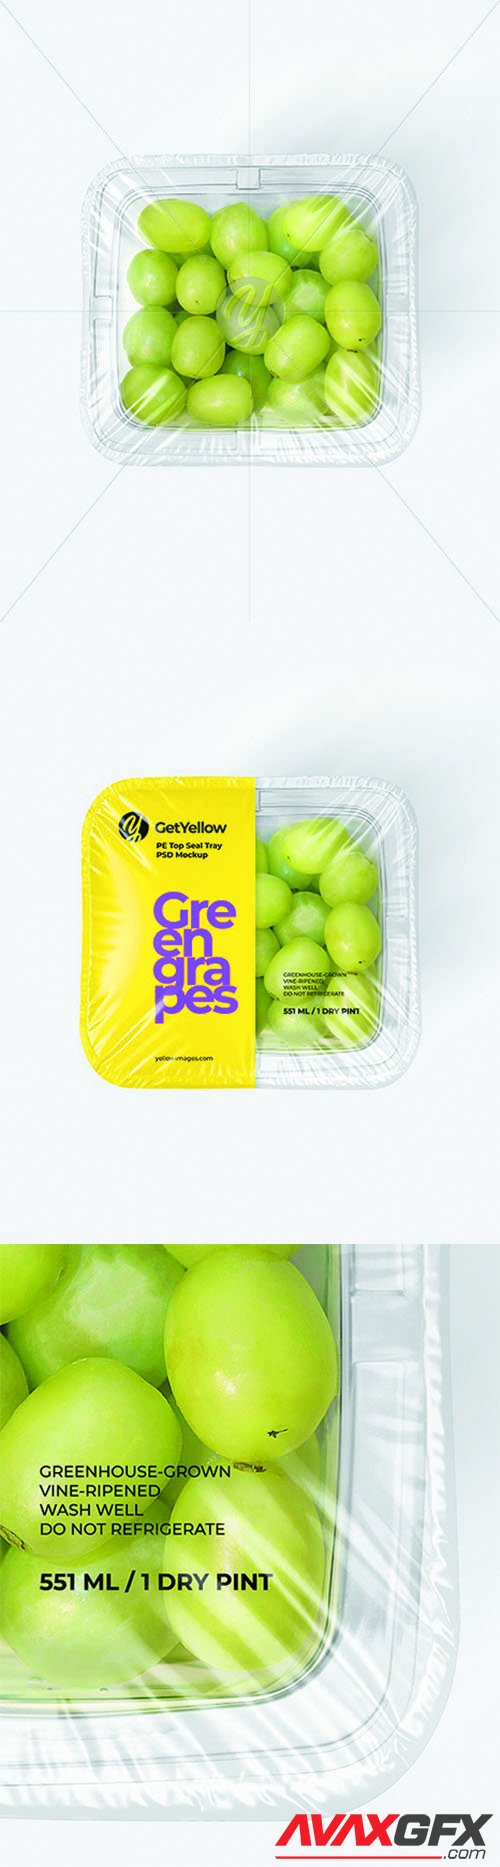 Clear Plastic Tray with Green Grapes Mockup 68893